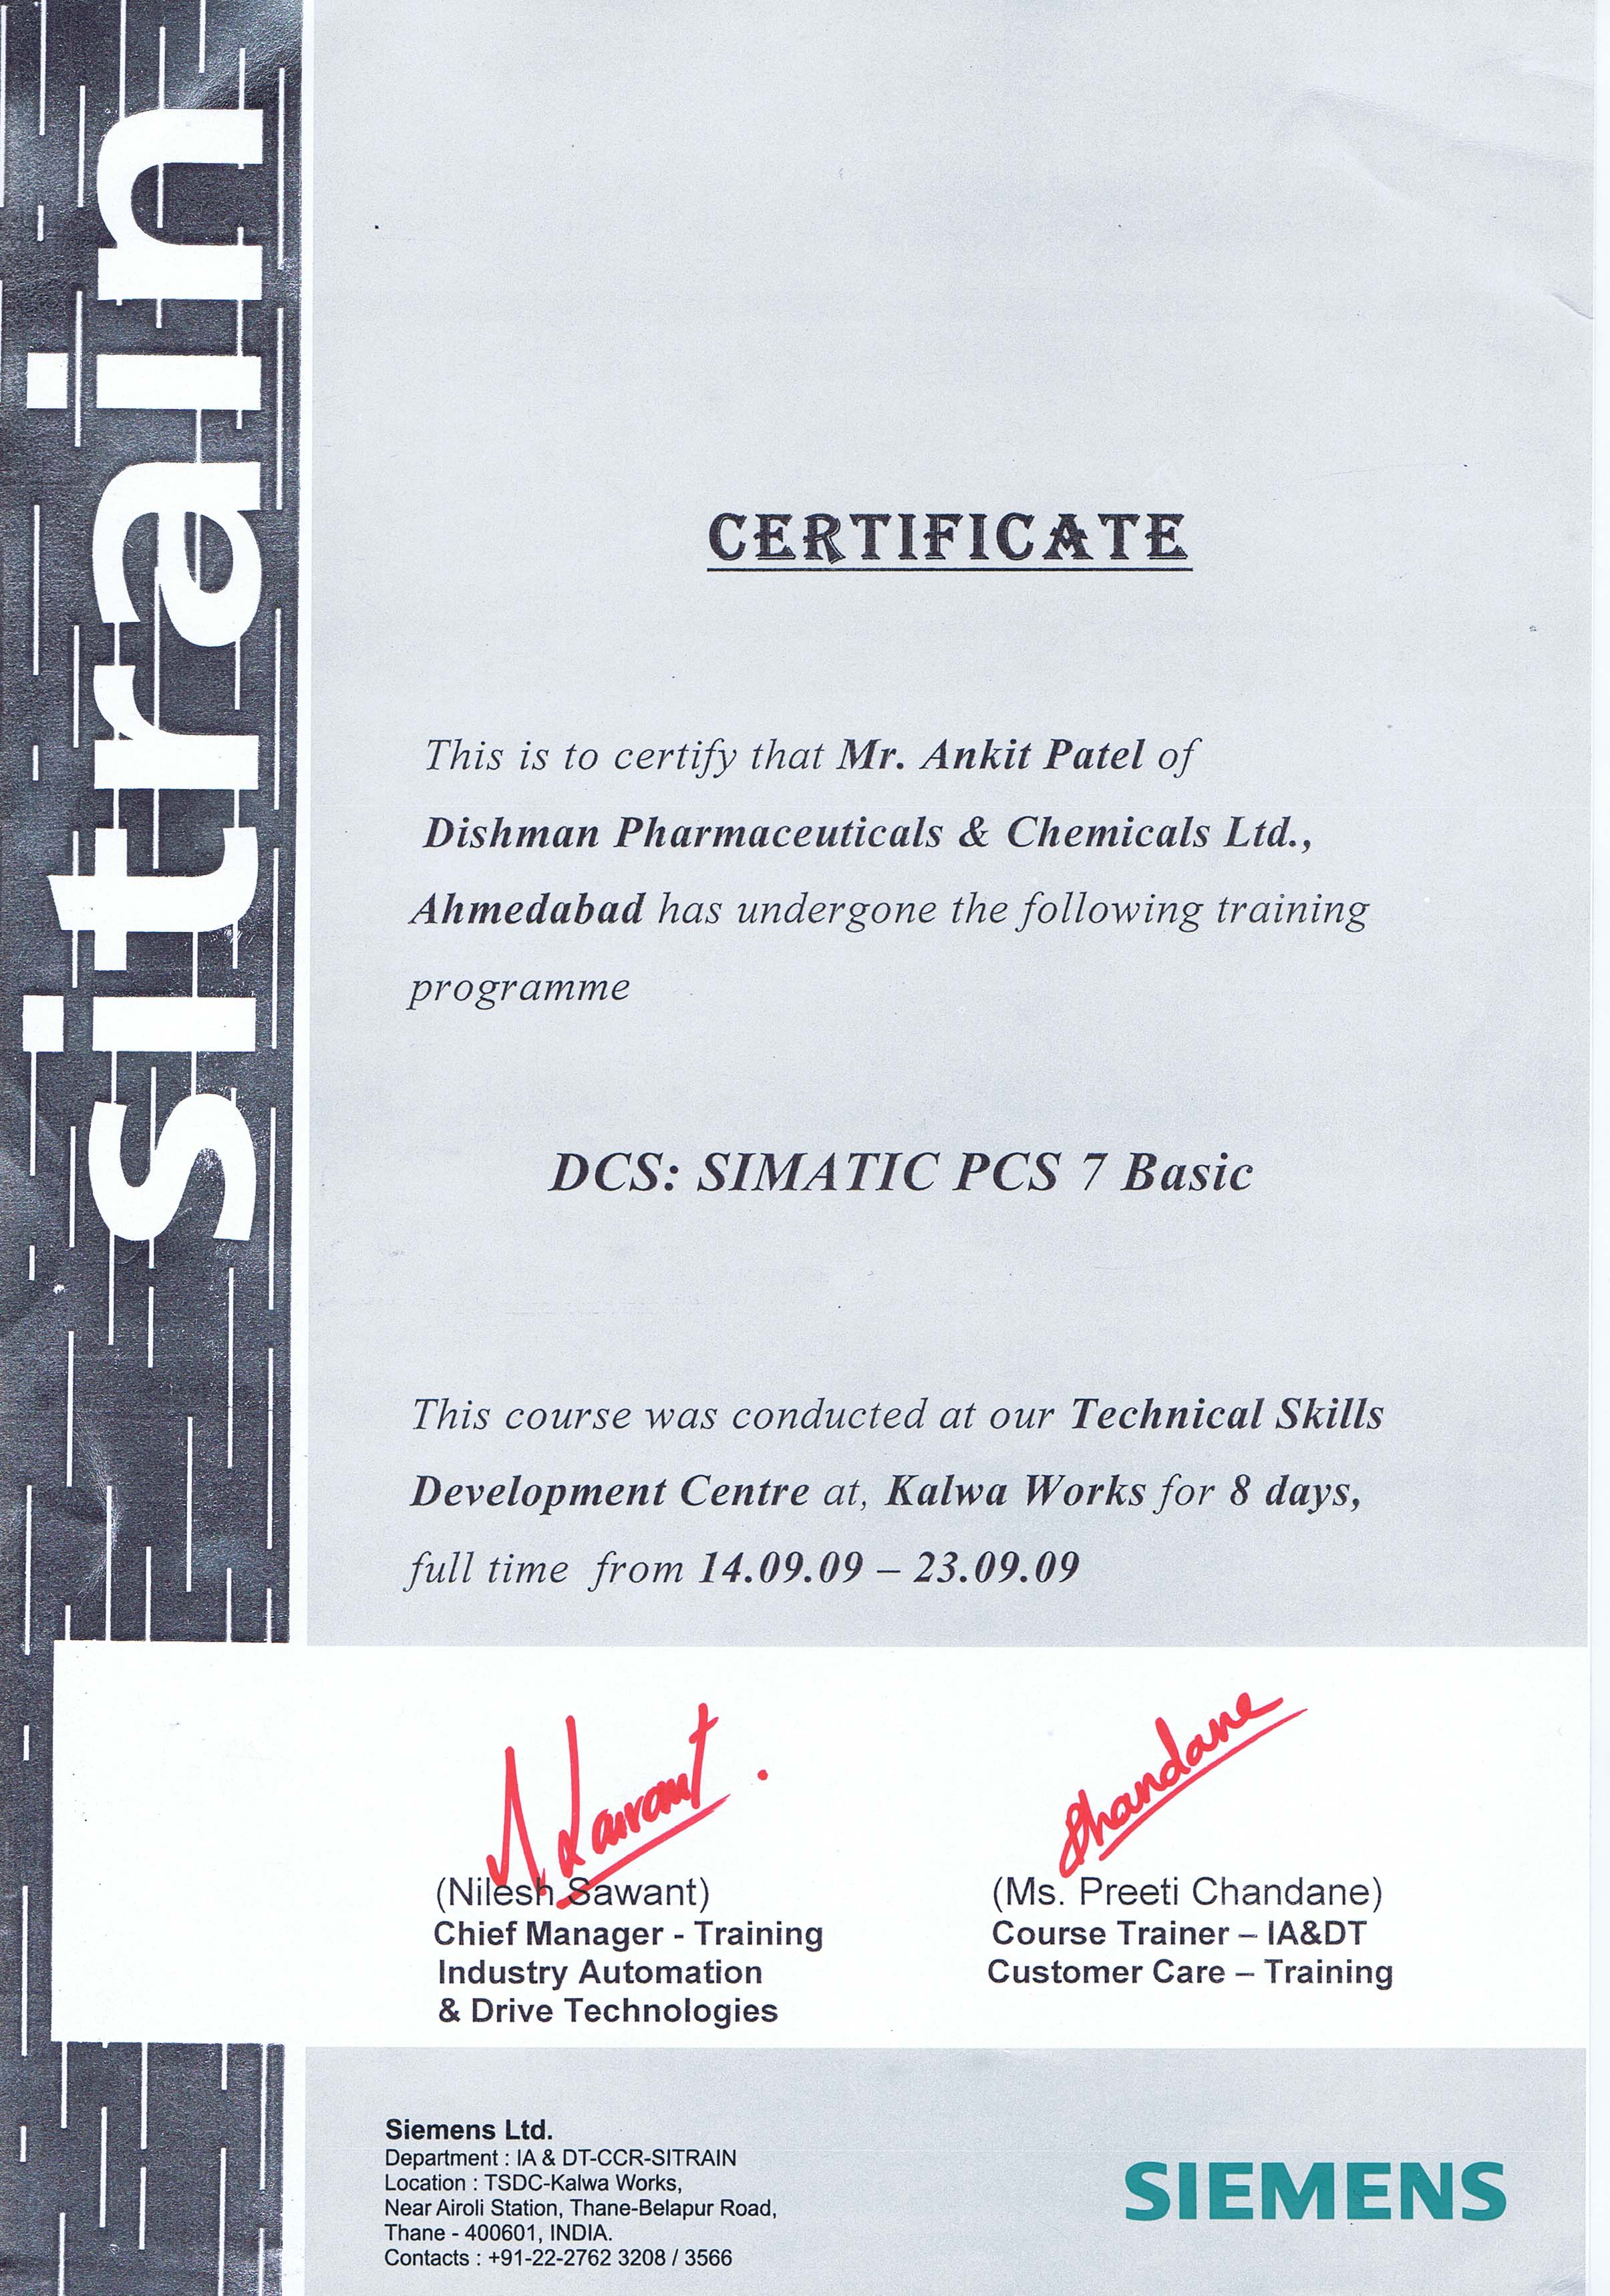 CERTIFICATE

This is to certify that Mr. Ankit Patel of

Dishman Pharmaceuticals &amp; Chemicals Ltd.,

Ahmedabad has undergone the following training

programme

DCS: SIMATIC PCS 7 Basic

This course was conducted at our Technical Skills

Development Centre at, Kalwa Works for 8 days,
full time from 14.09.09 — 23.09.09

ow
(Nilesh Sawant)
Chief Manager - Training

Industry Automation
&amp; Drive Technologies

Siemens Ltd.

Department : IA &amp; DT-CCR-SITRAIN
Location : TSDC-Kalwa Works,

Near Airoli Station, Thane-Belapur Road,
Thane - 400601, INDIA.

Contacts : +91-22-2762 3208 / 3566

a

(Ms. Preeti Chandane)
Course Trainer — IA&amp;DT
Customer Care — Training

SIEMENS